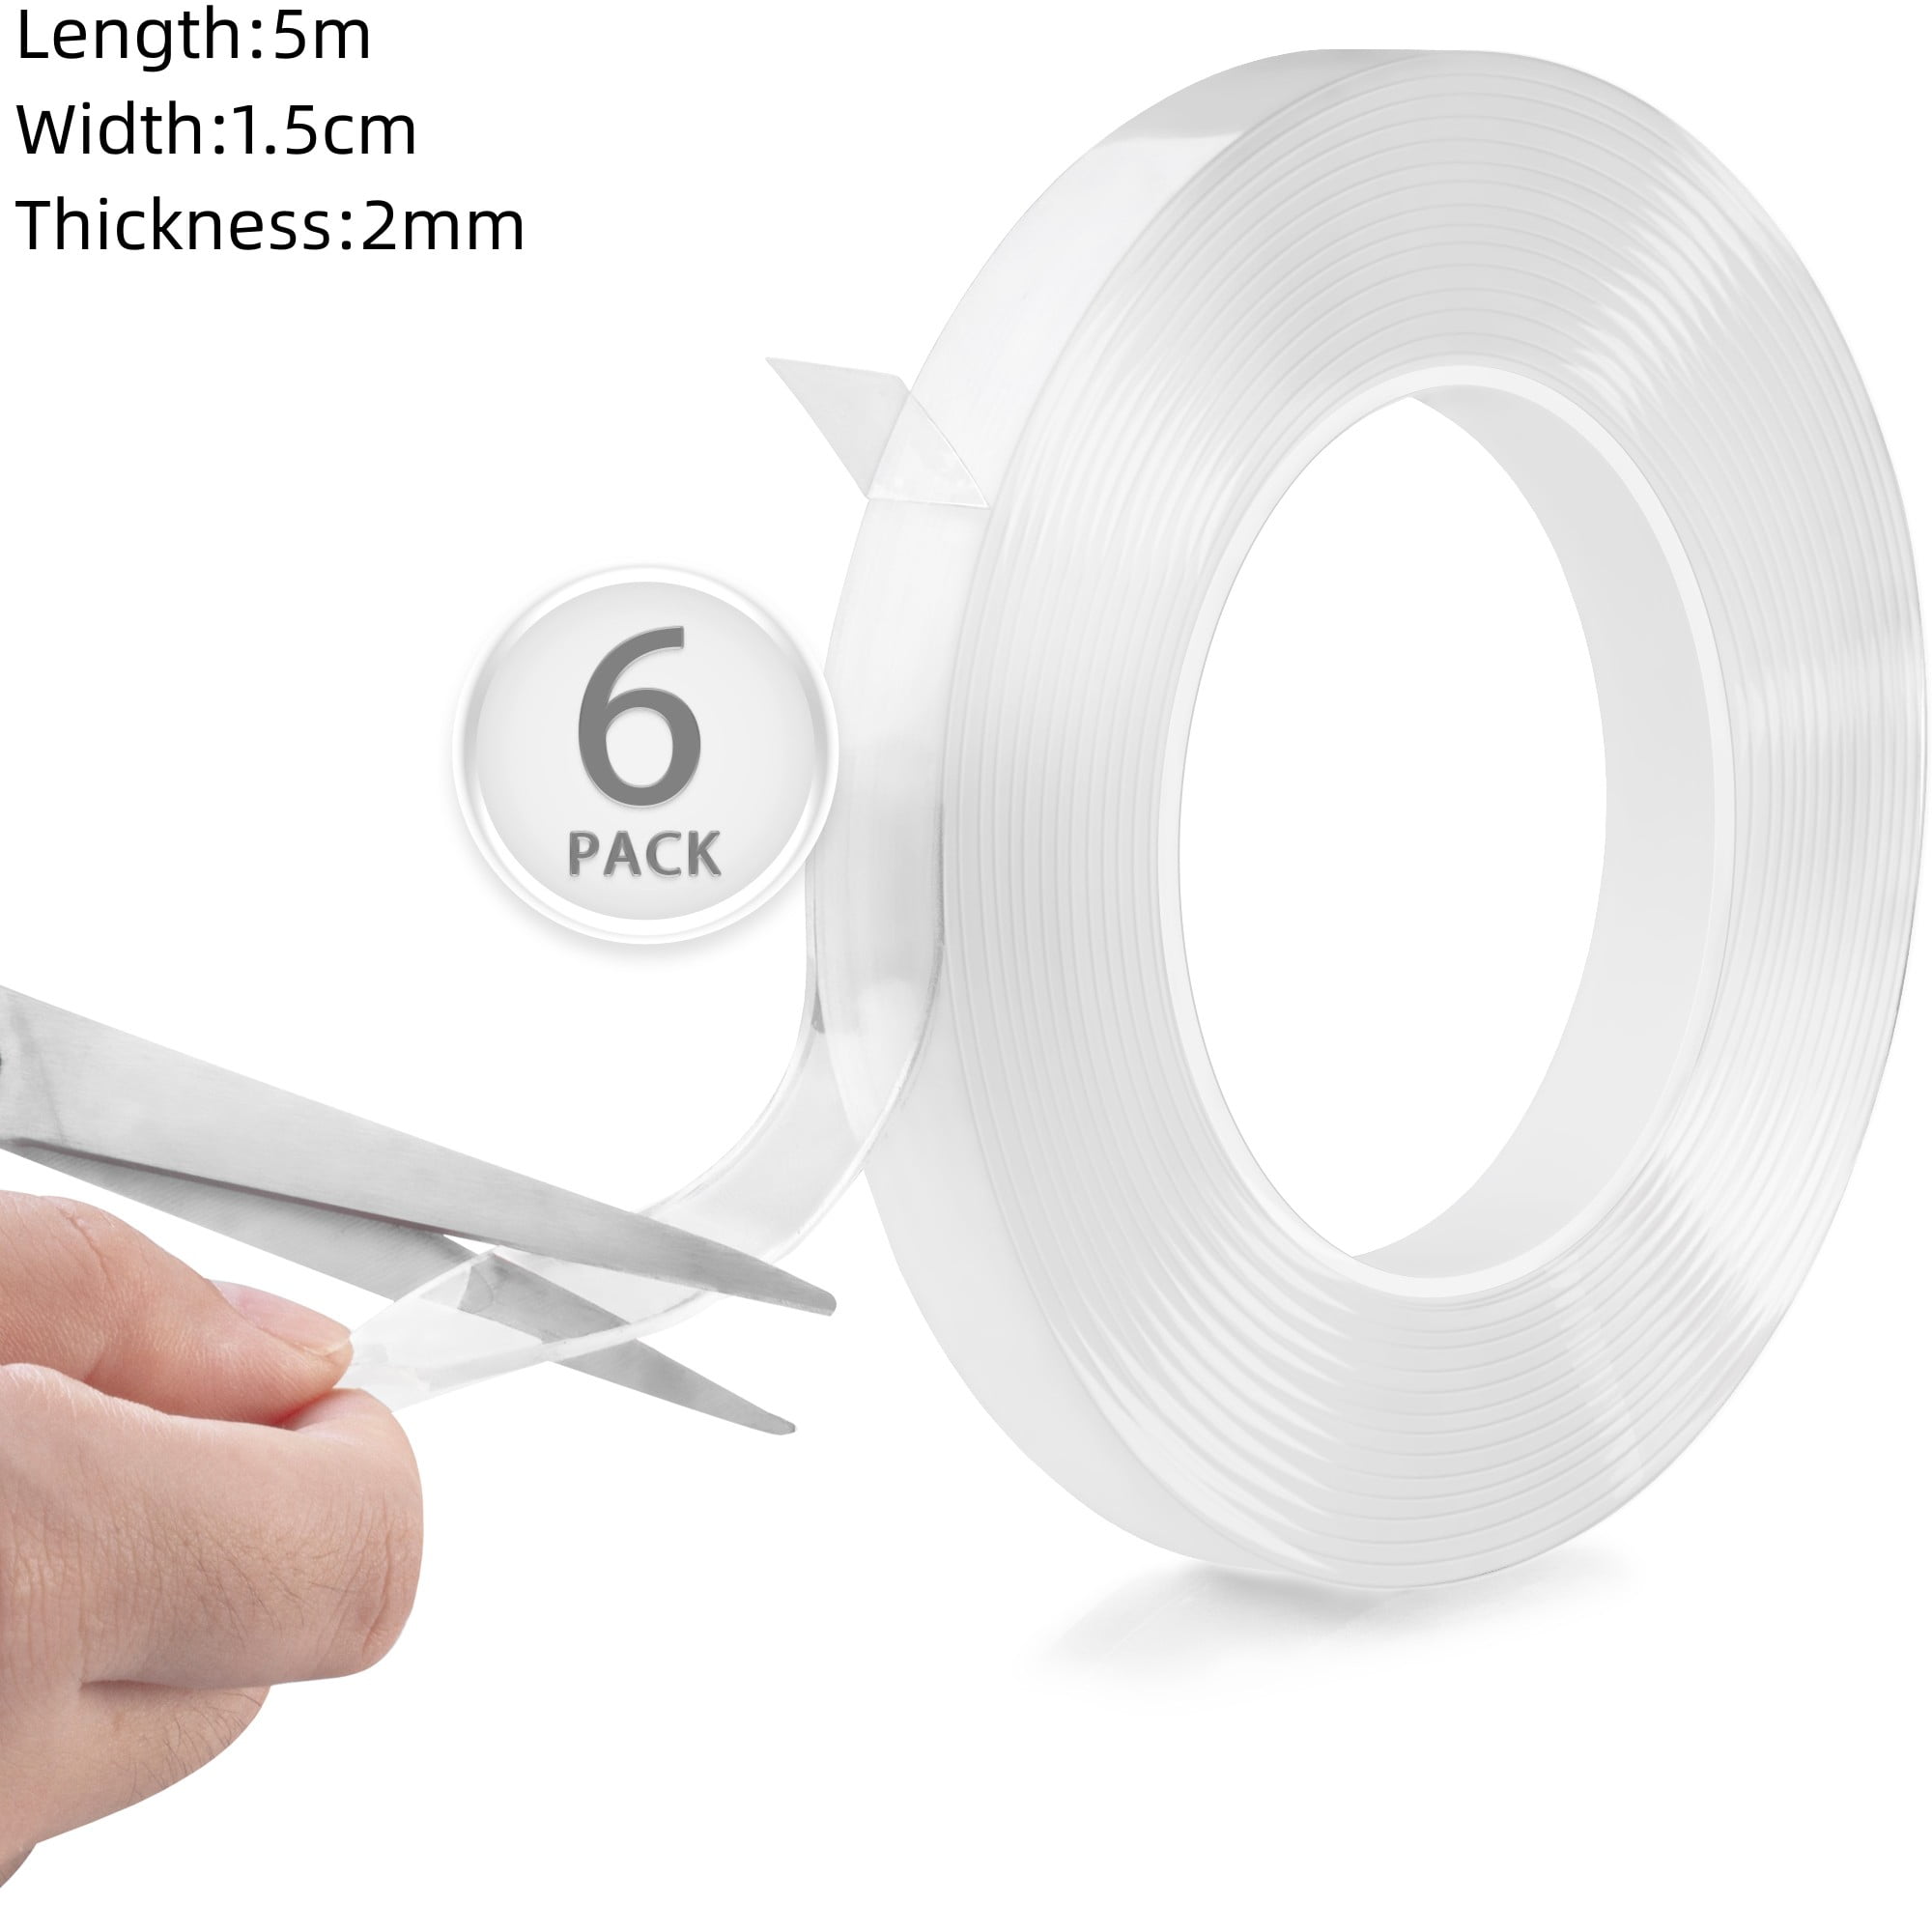 Double Sided Clear Mounting Tape 0.6 inch Wide, 16.4' Long Acrylic Gel Tape for Temps 0-100, Heavy Duty Multipurpose by KapStrom